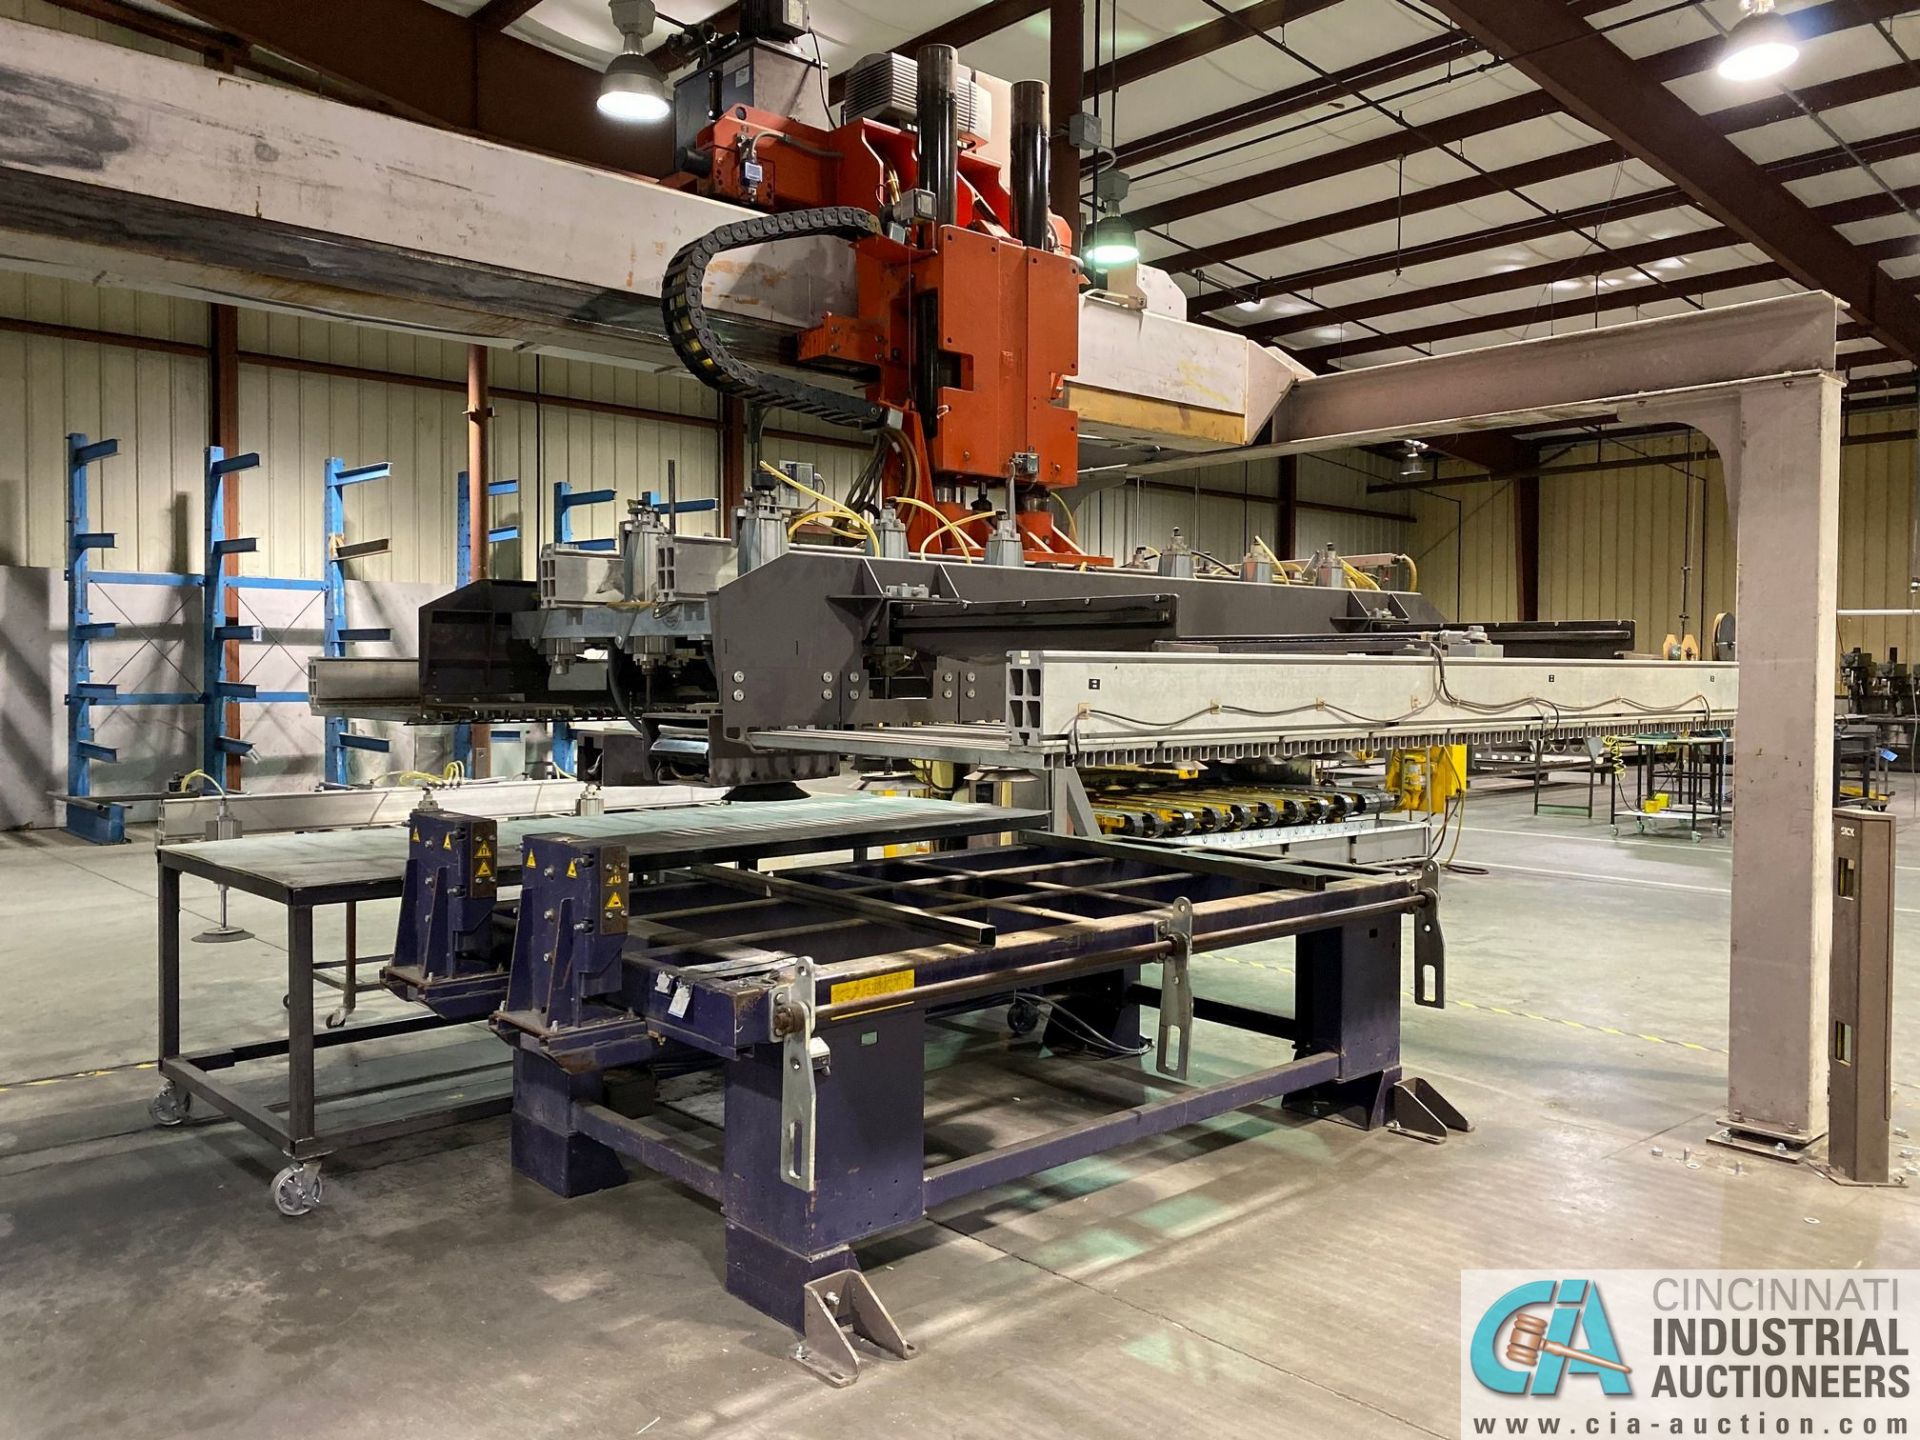 4,400-WATT BYSTRONIC BYSPEED 3015 SHUTTLE TABLE CNC LASER W/ LOADER; S/N 612, RESONATOR AND TURBO - Image 3 of 20